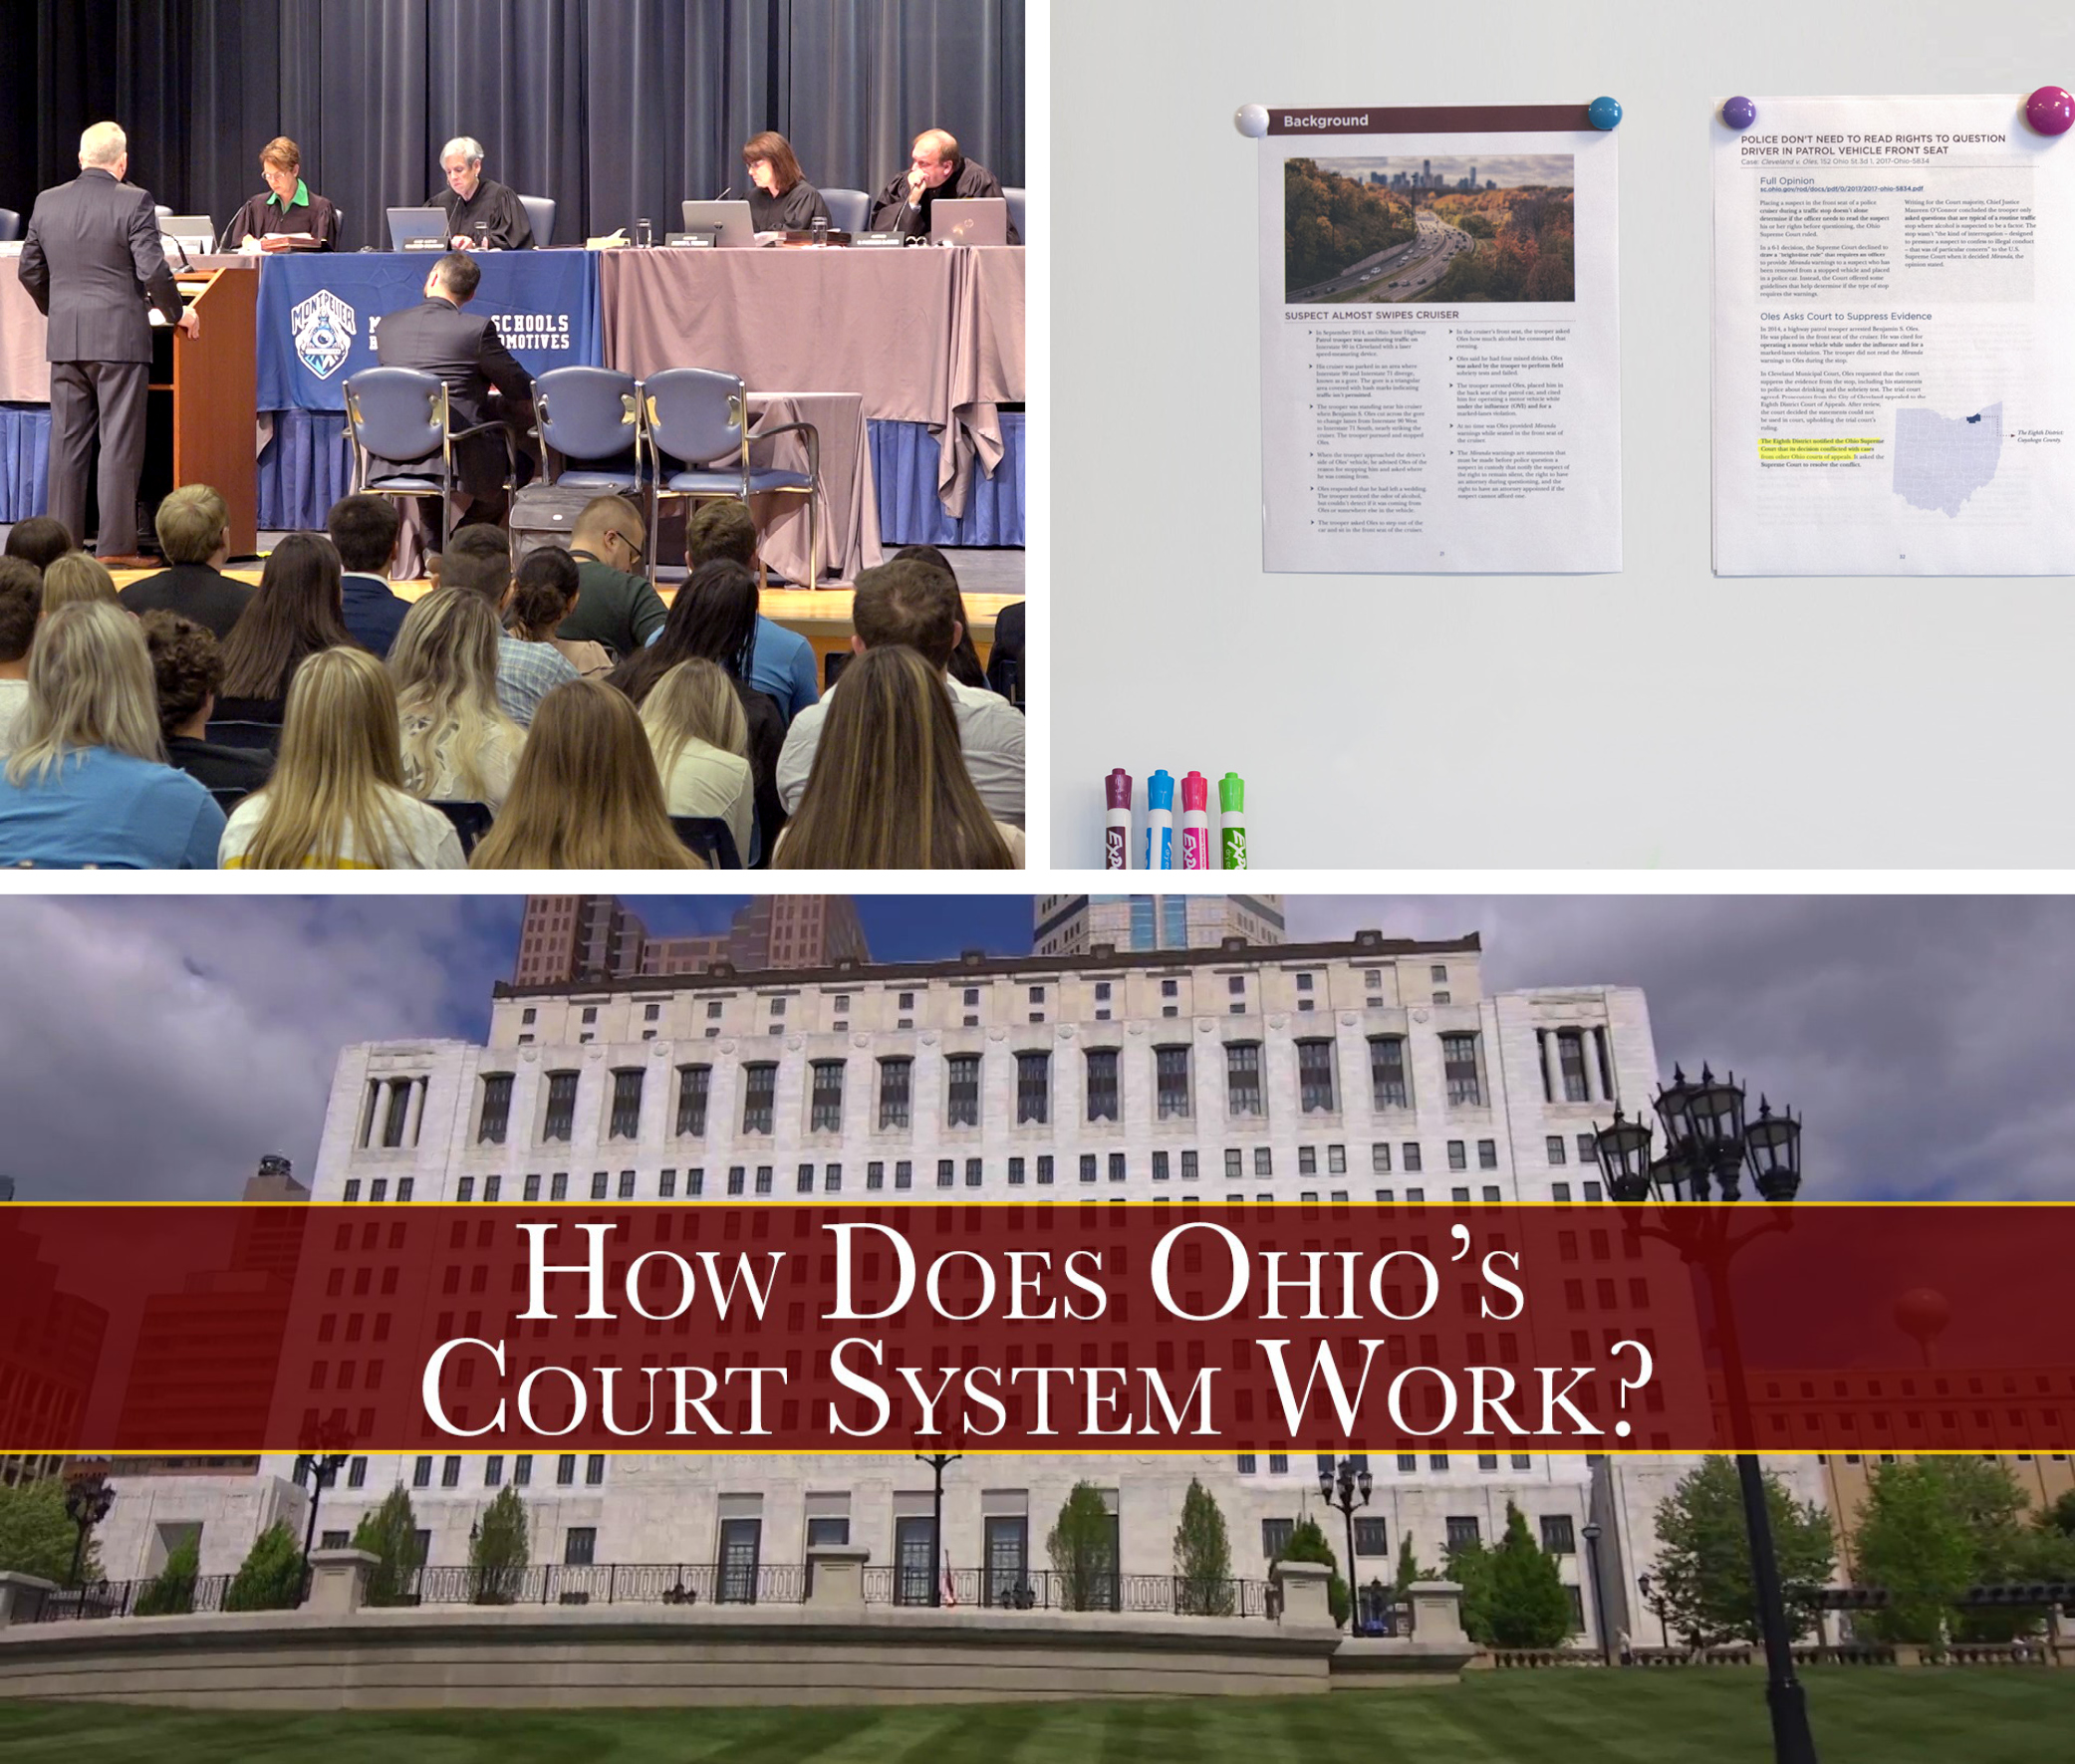 Images including (top left) Ohio Supreme Court Justices listening to an attorney present oral arguments during Off-Site Court at Montpelier High School in Williams County, Ohio; (top right) an image of a white board with two documents displayed with magnets; and (bottom) an image of the Thomas J. Moyer Ohio Judicial Center with the words 'How Does Ohio's Court System Work?' superimposed on top of it